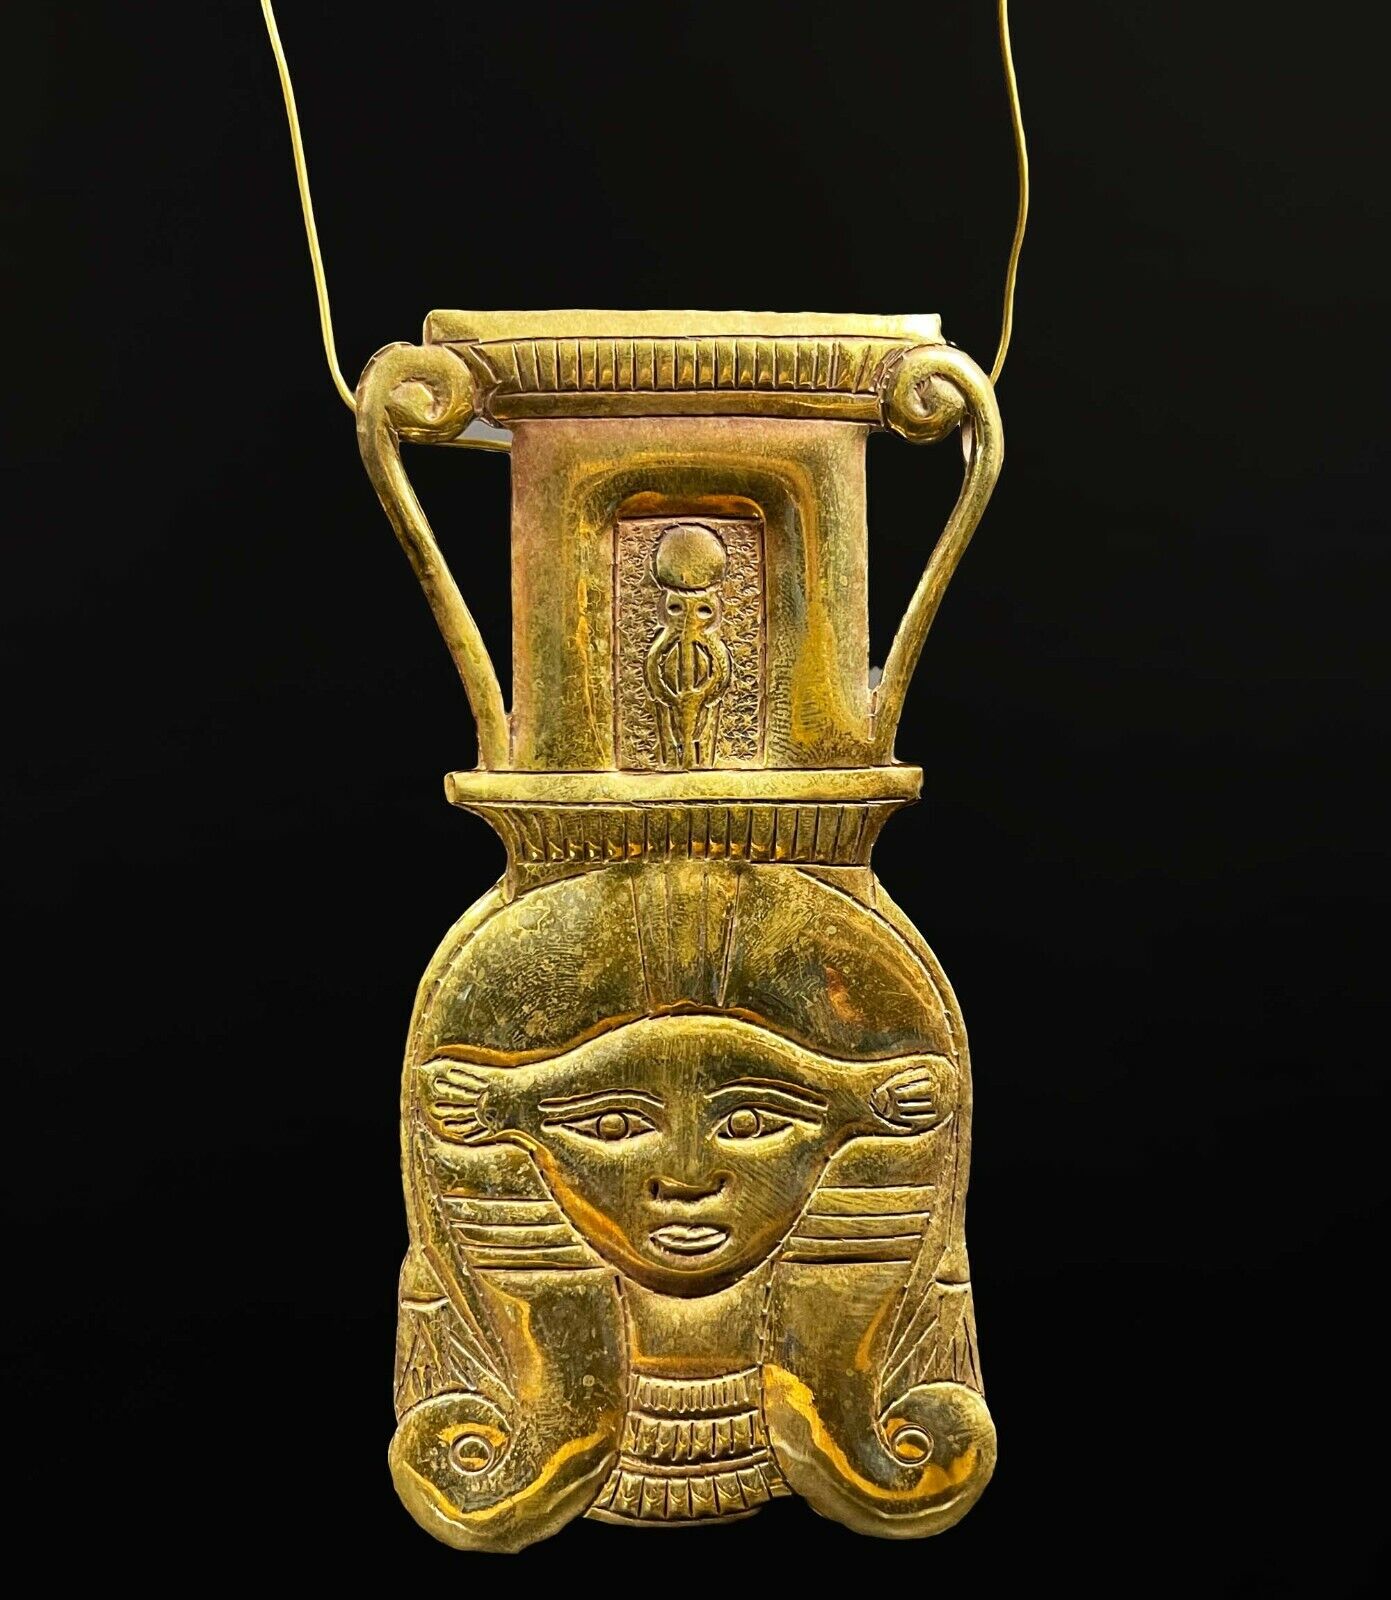 Unique Pendant of The Egyptian Hathor goddess of the sky & fertility and Love